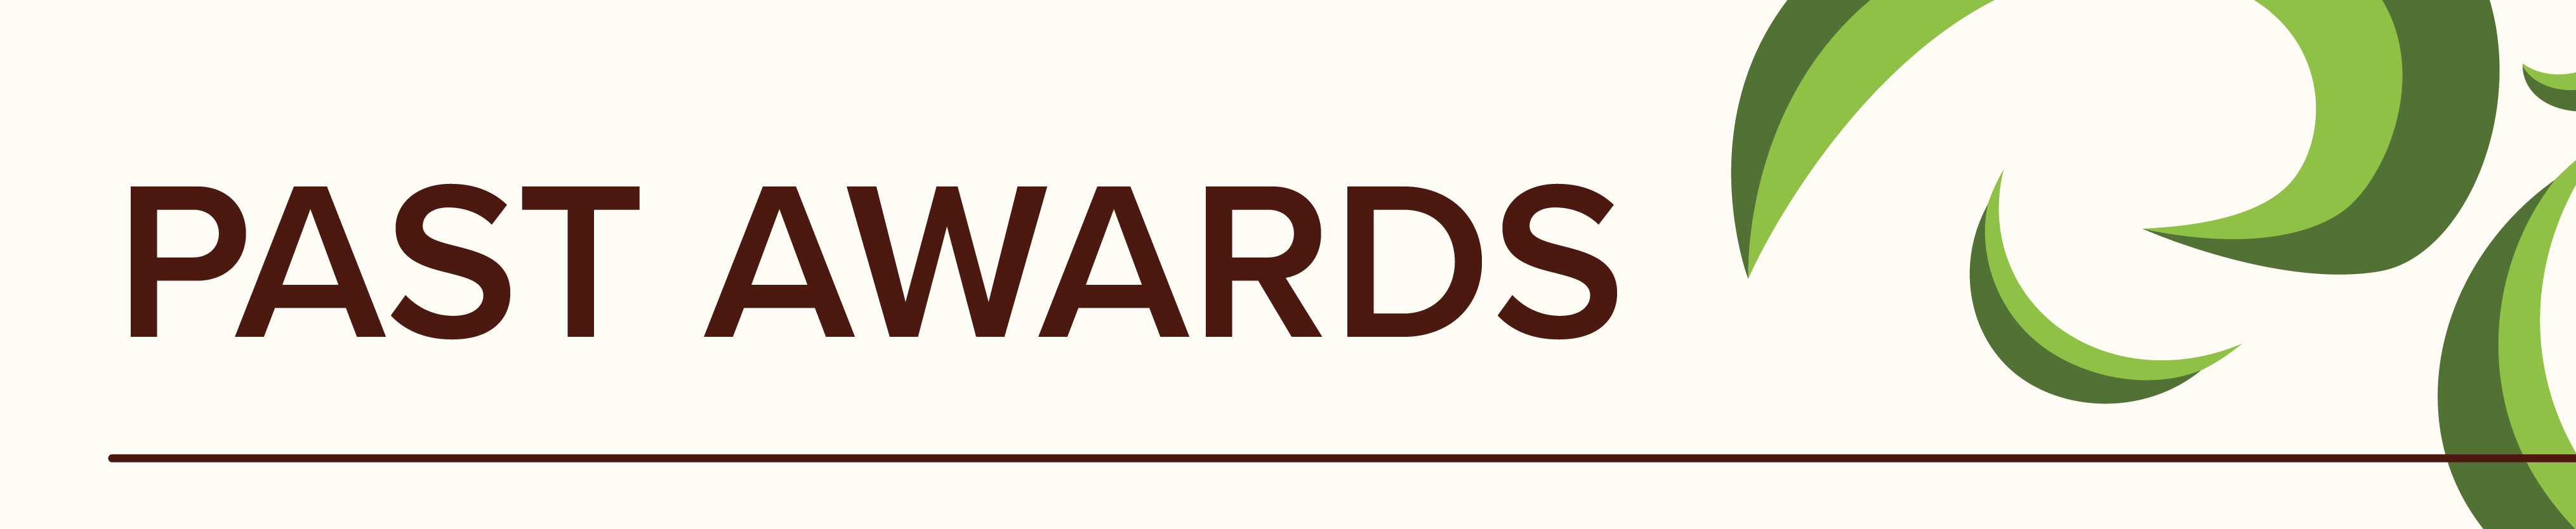 Past Awards Banner